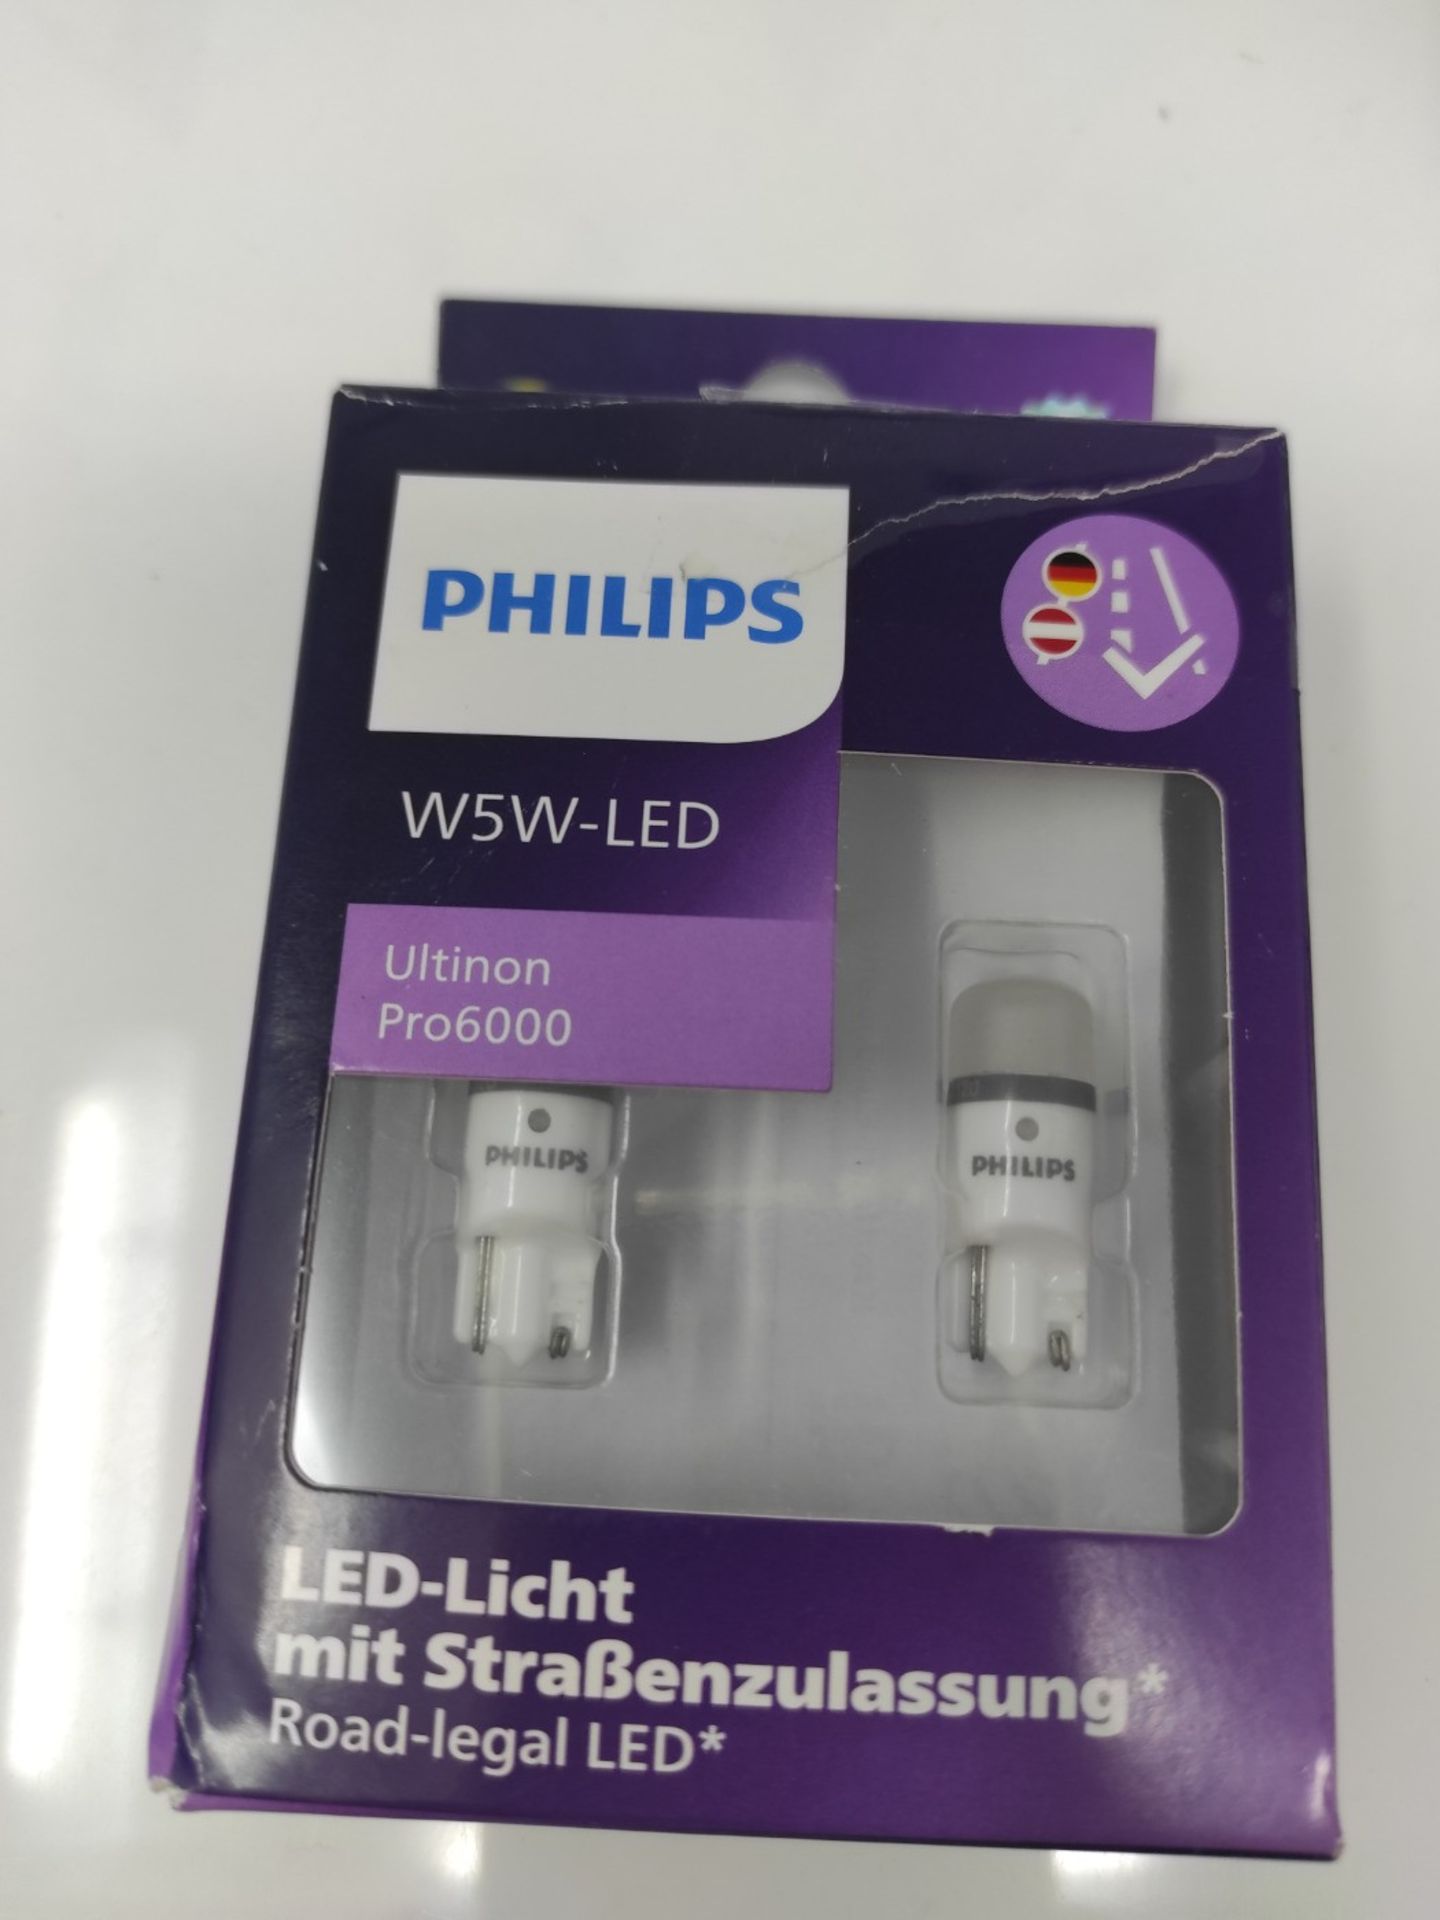 [NEW] Philips Ultinon Pro6000 W5W T10 LED vehicle lighting with road approval, 6,000K, - Image 2 of 2